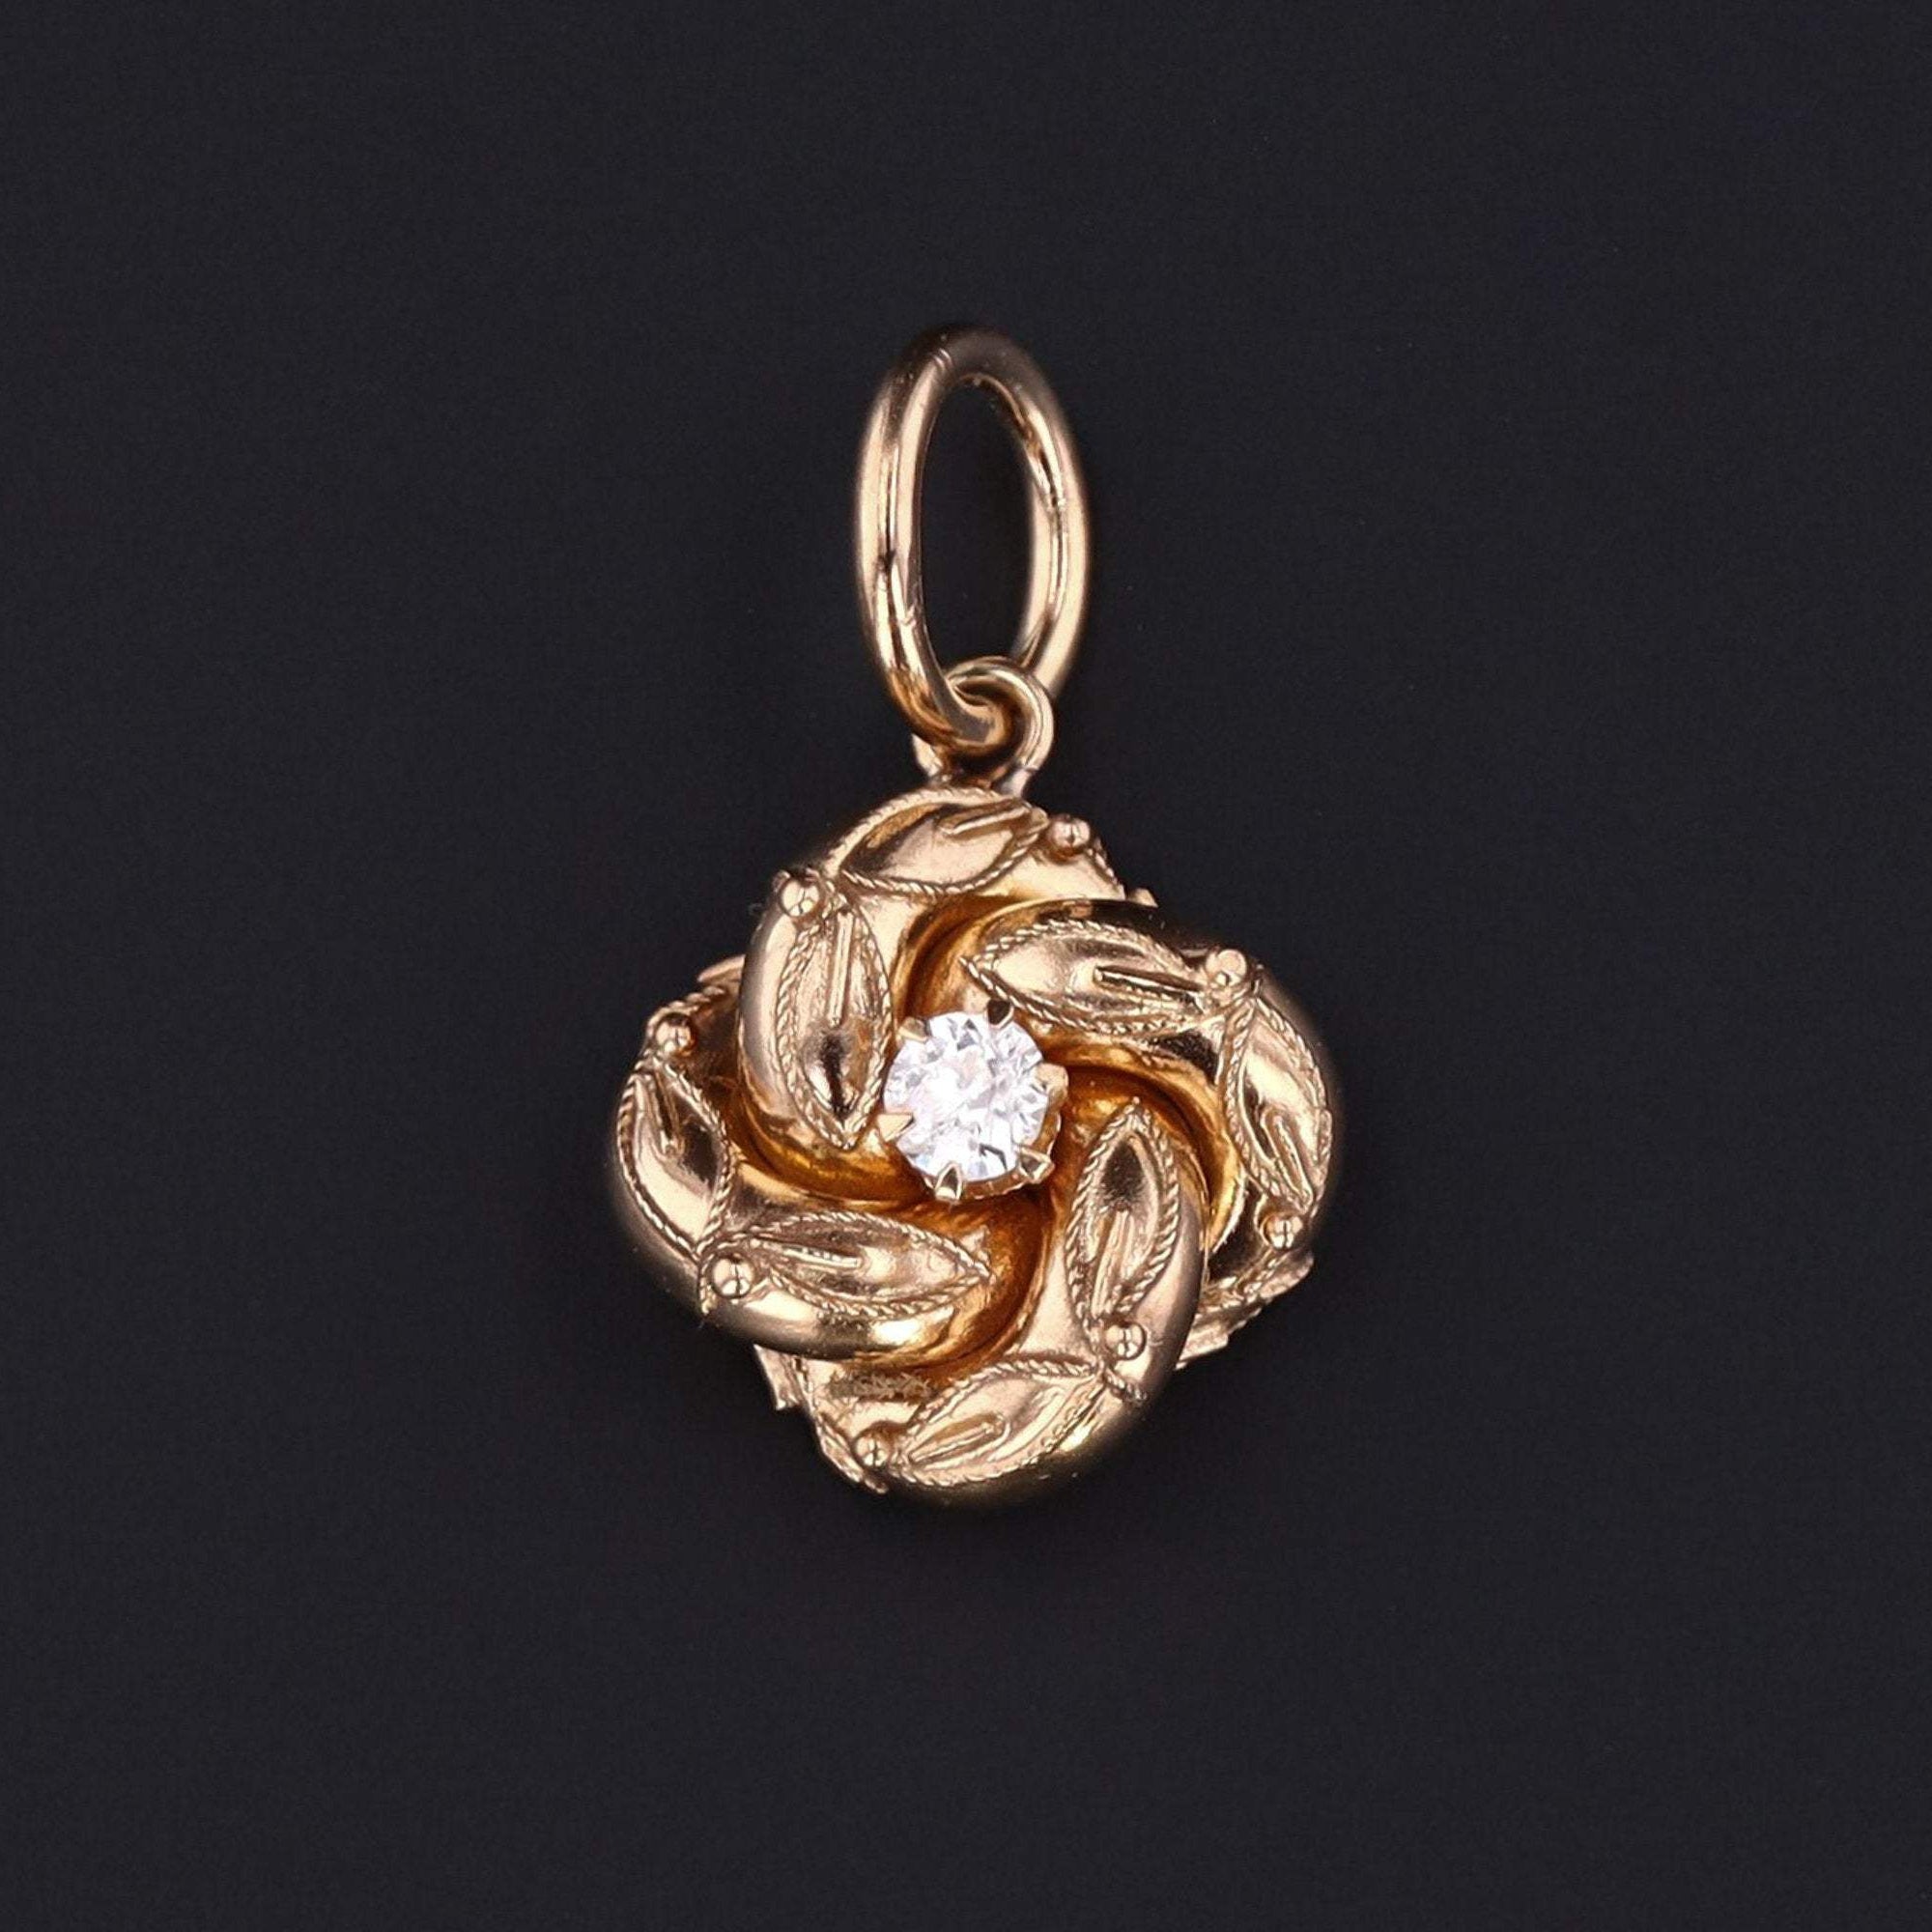 Love Knot Charm or Pendant | Antique Love Knot with Diamond | 14k Gold Charm | Pin Conversion Charm